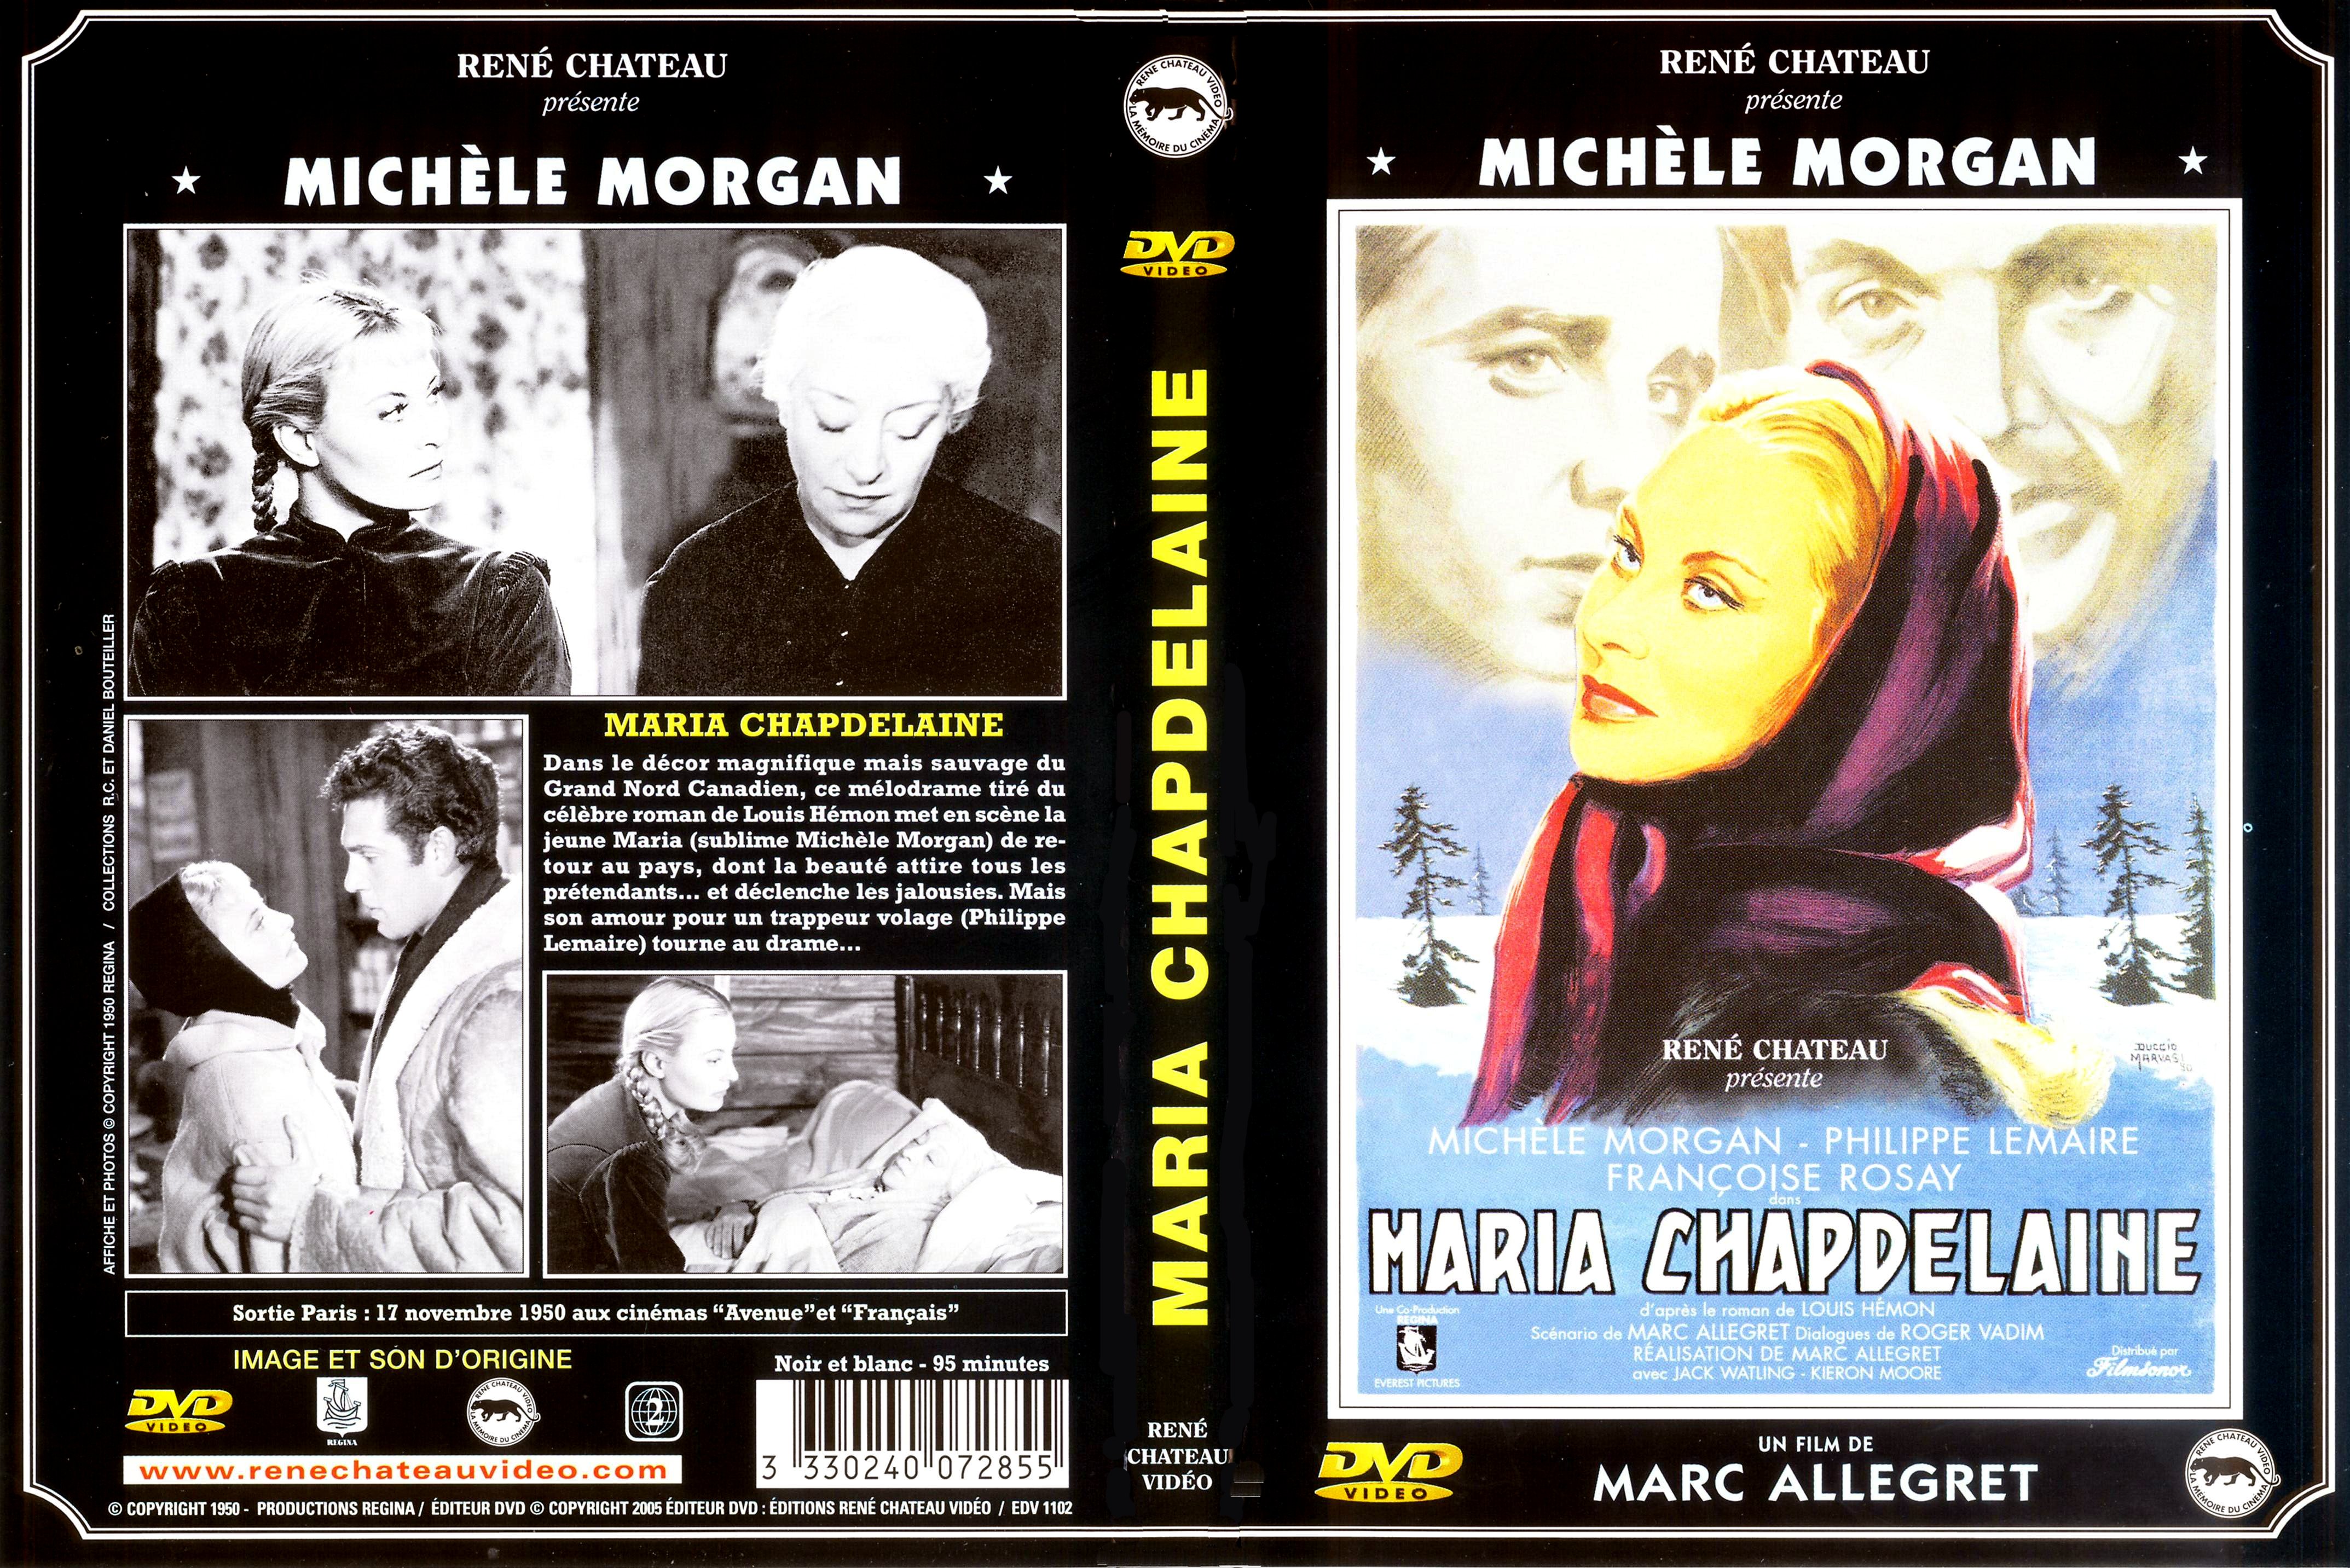 Jaquette DVD Maria Chapdelaine v2